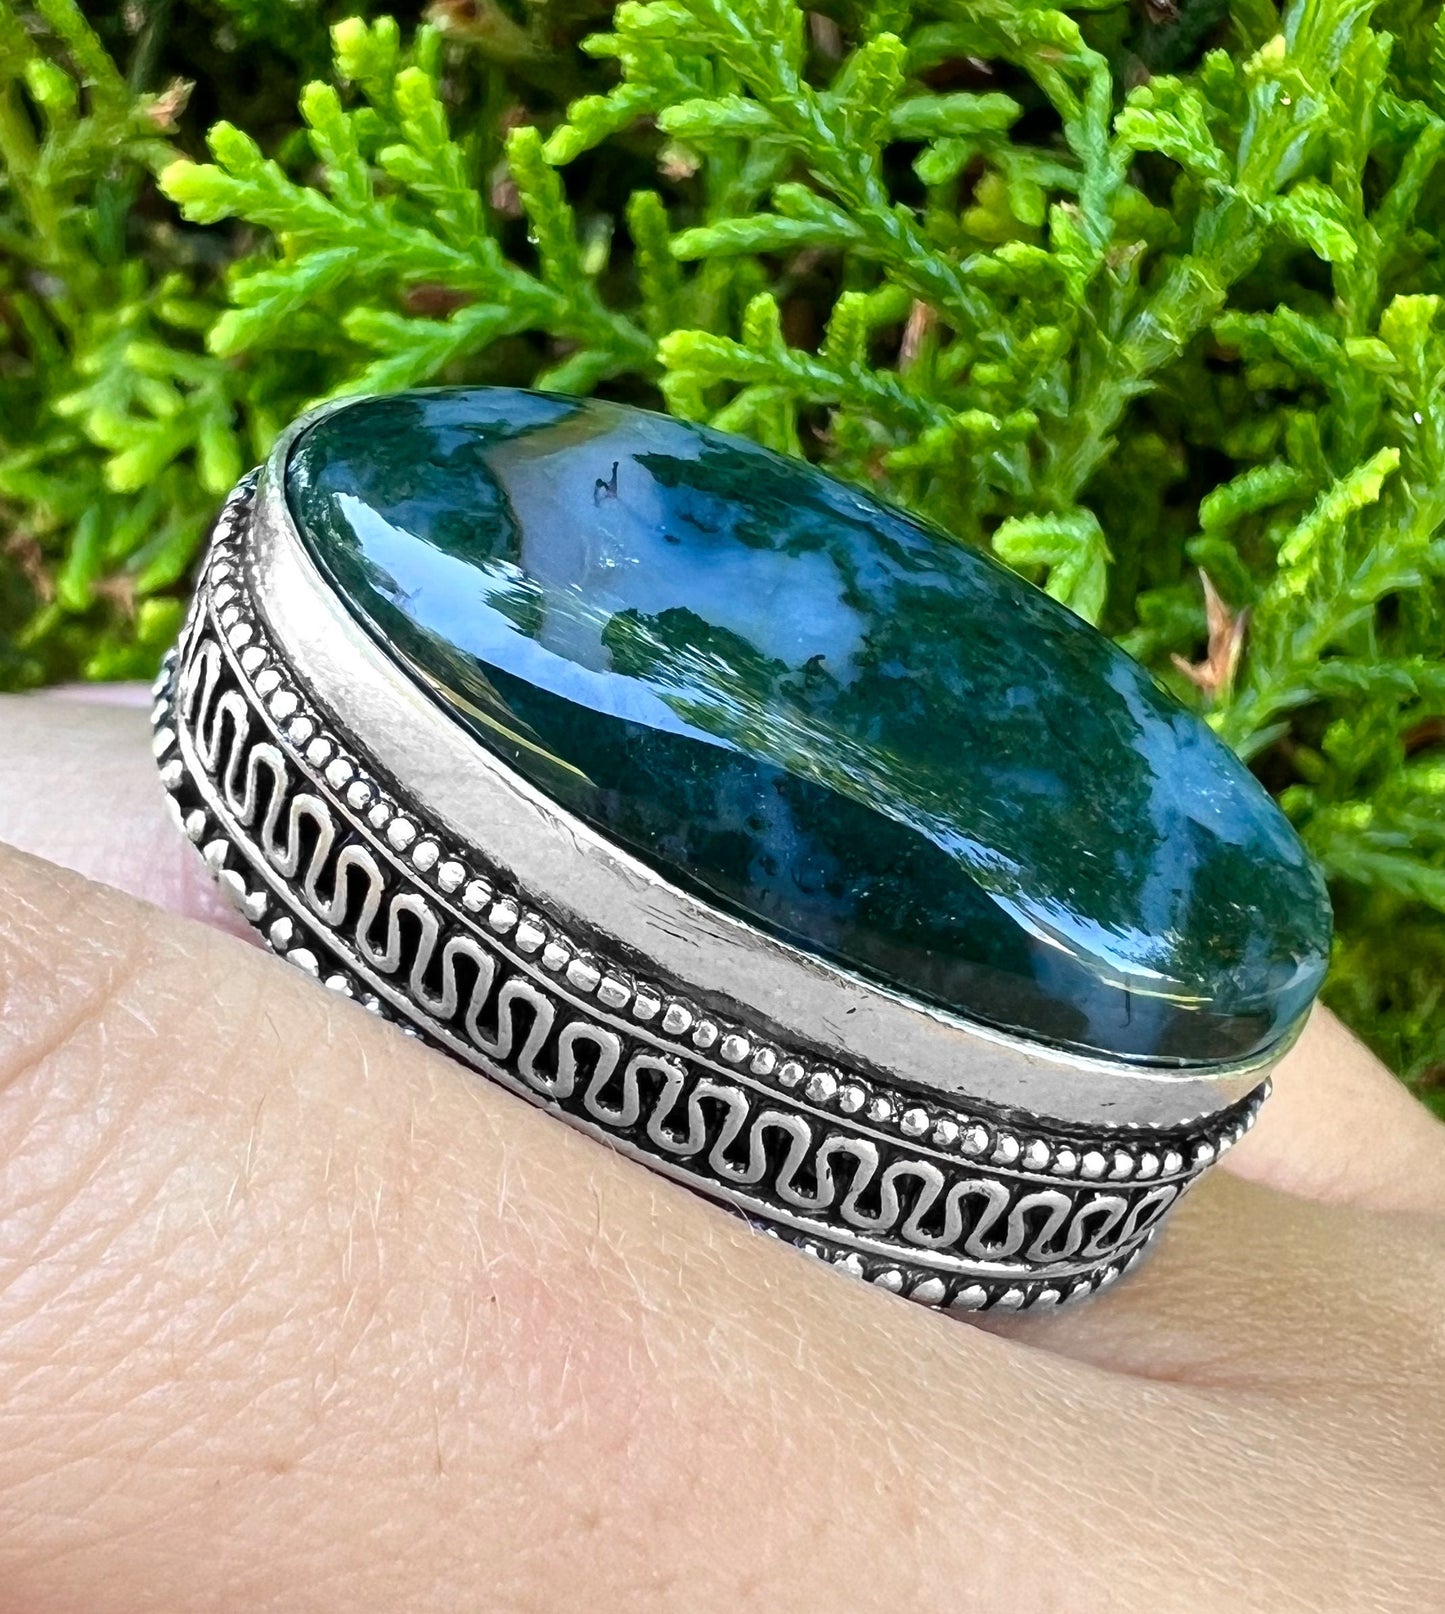 Moss Agate Ring In Sterling Silver Size US 5 Statement Ring One Of A Kind Crystal Ring